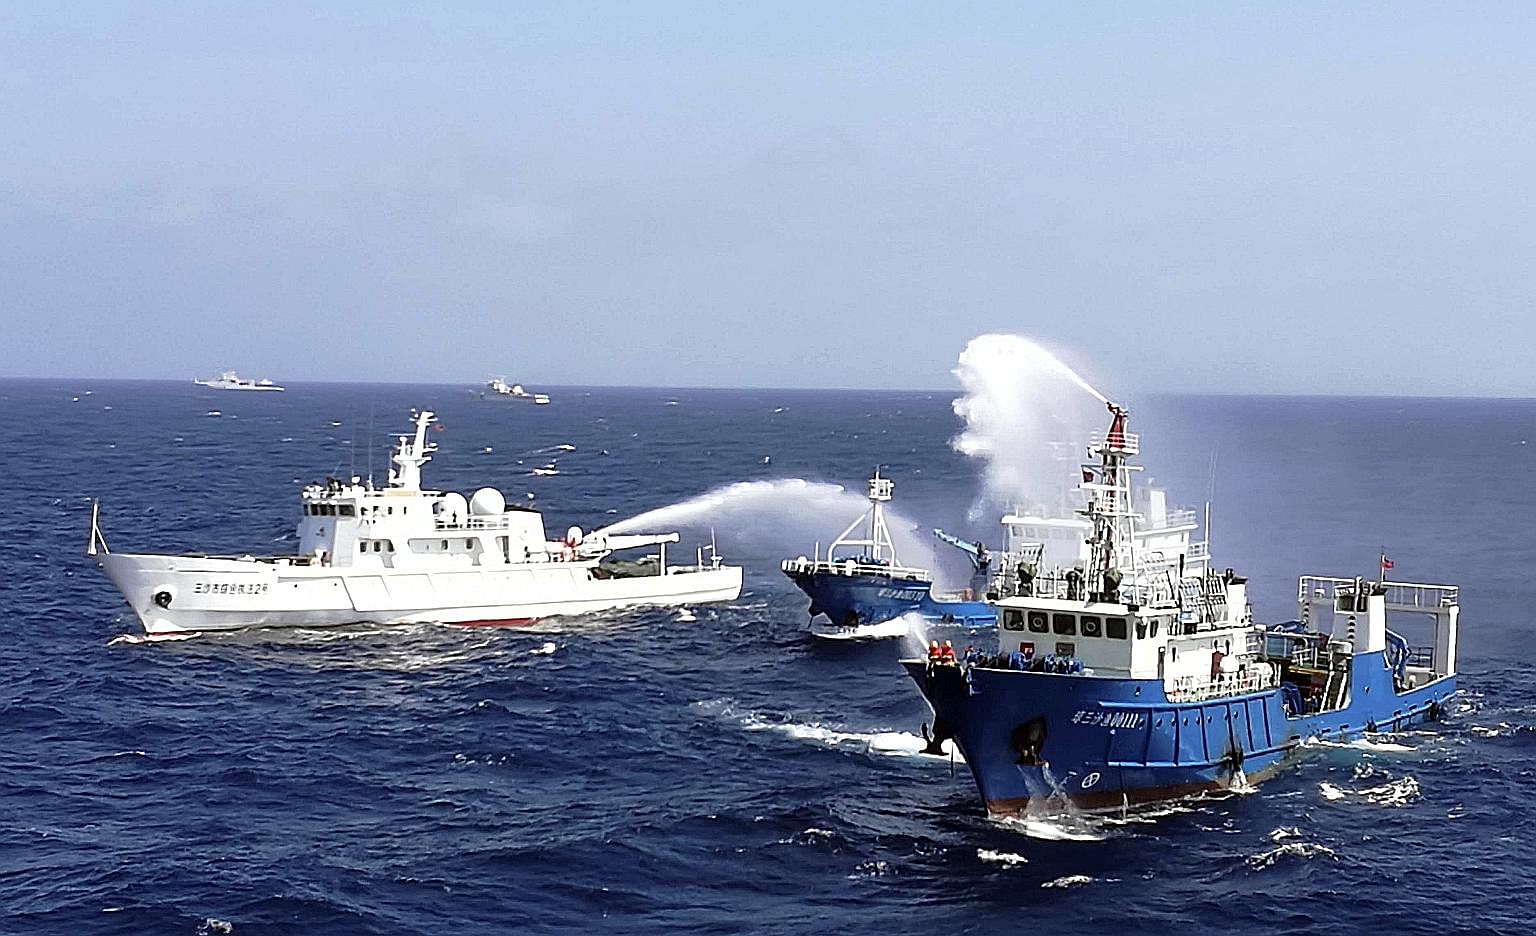 Chinese ships put out a fire on a cargo vessel during a drill in the South China Sea near Hainan province last month. China warned then that it would respond decisively to provocations in the South China Sea, as it faced mounting pressure to accept a